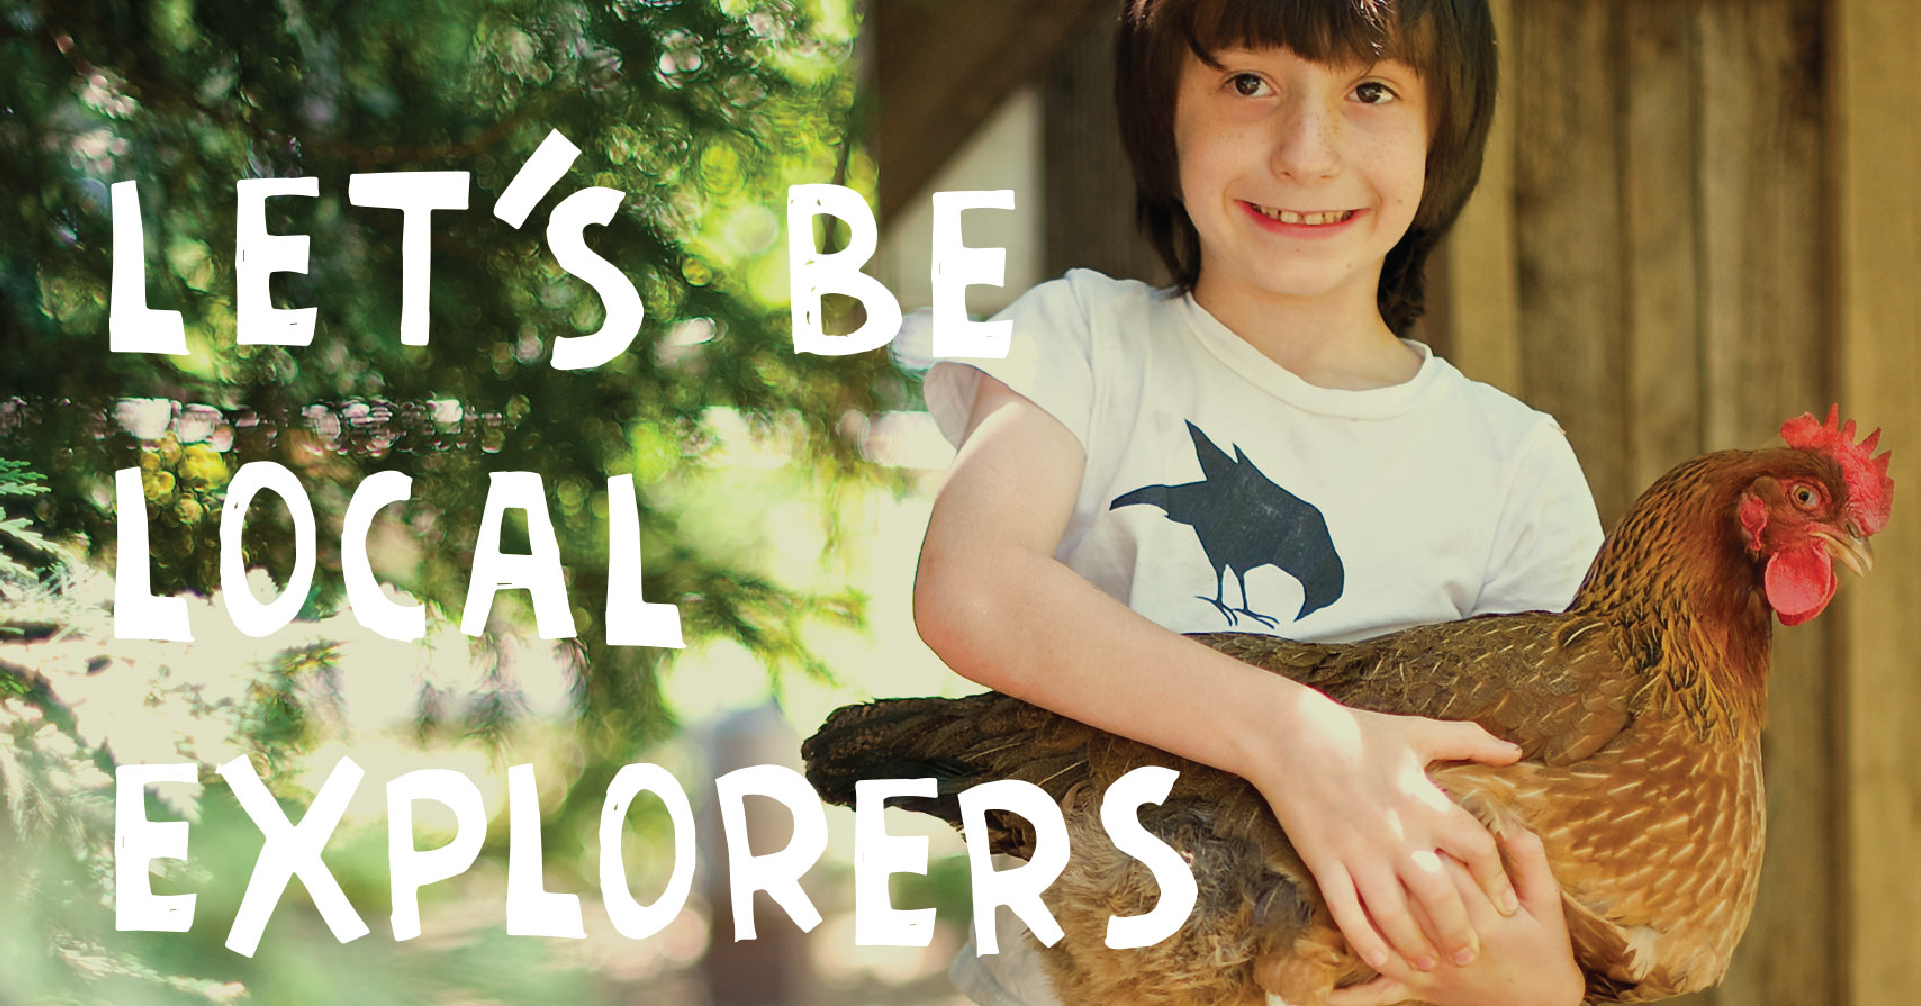 Child smiling and holding a chicken with the words “Let’s Be Local Explorers” in a hand-drawn font next to them